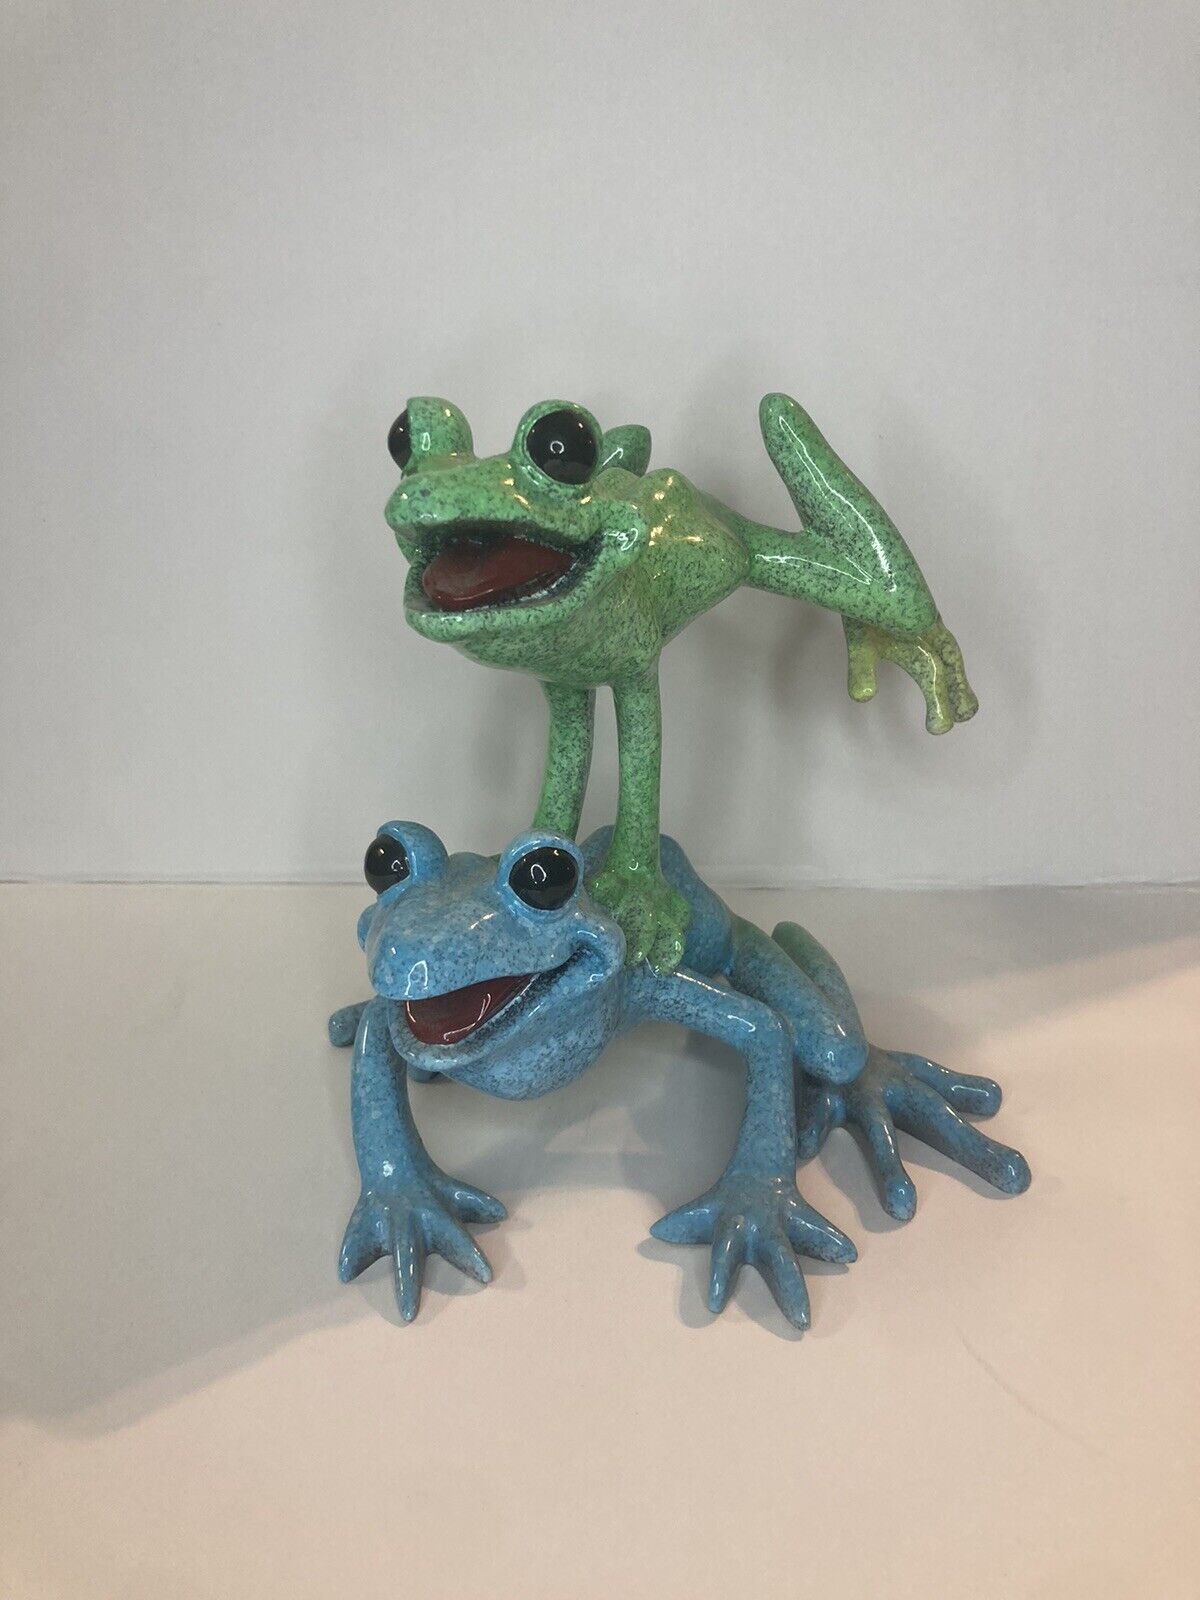 Kitty's Critters Leap Frogs Figurine Statue 2005 Tree Frogs Anthropomorphic NICE